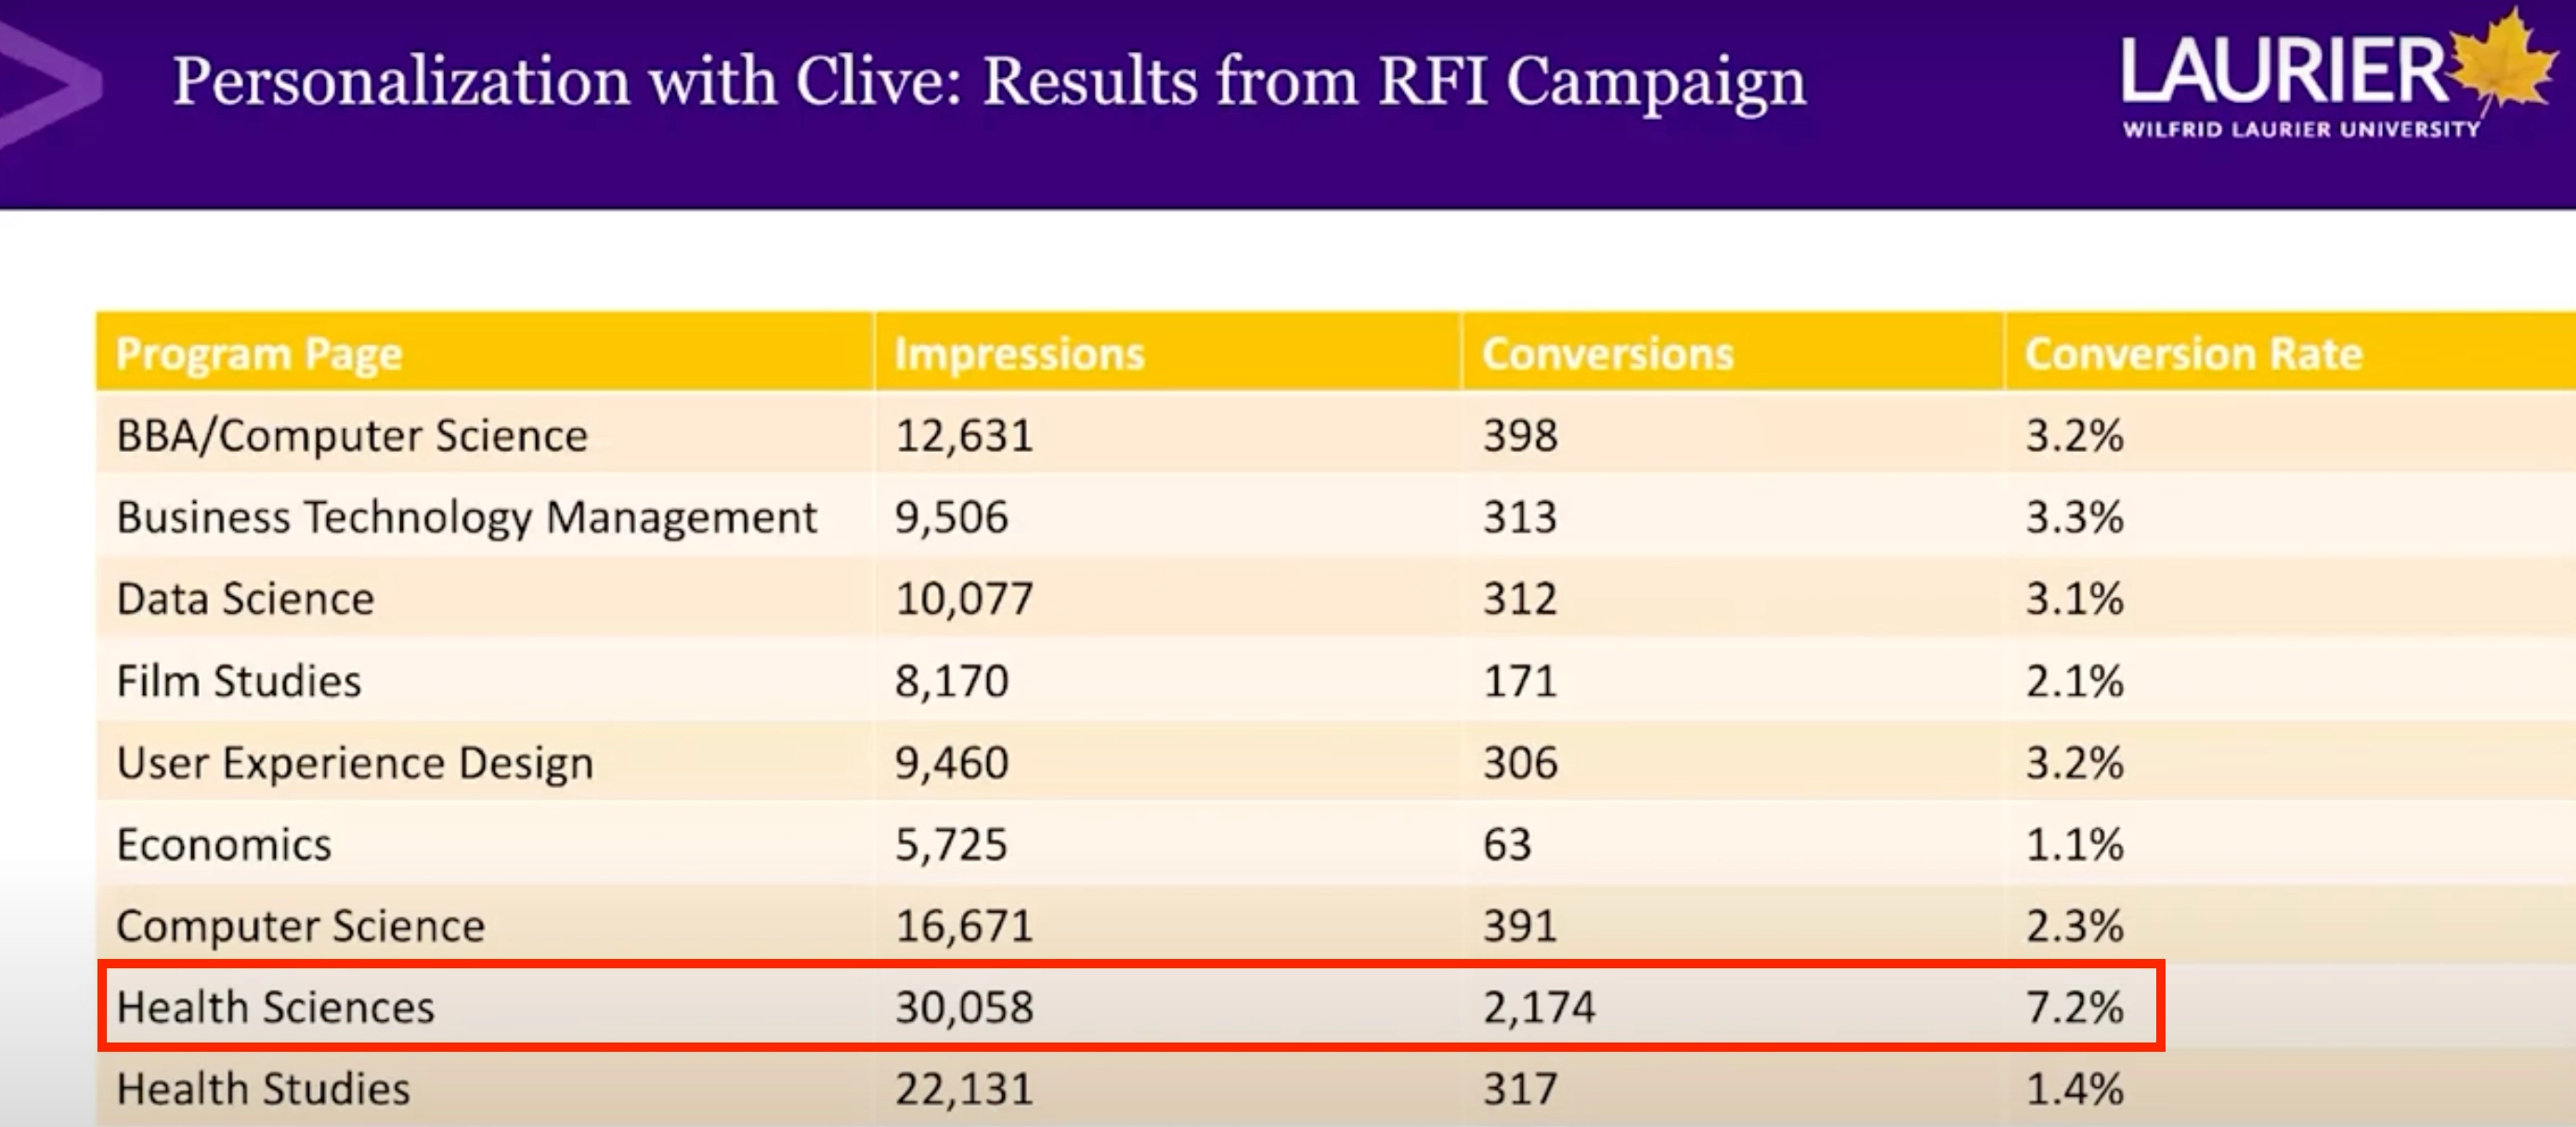 A table showing Wilfrid Laurier University program performance with impressions, conversions, and rates from an RFI campaign.